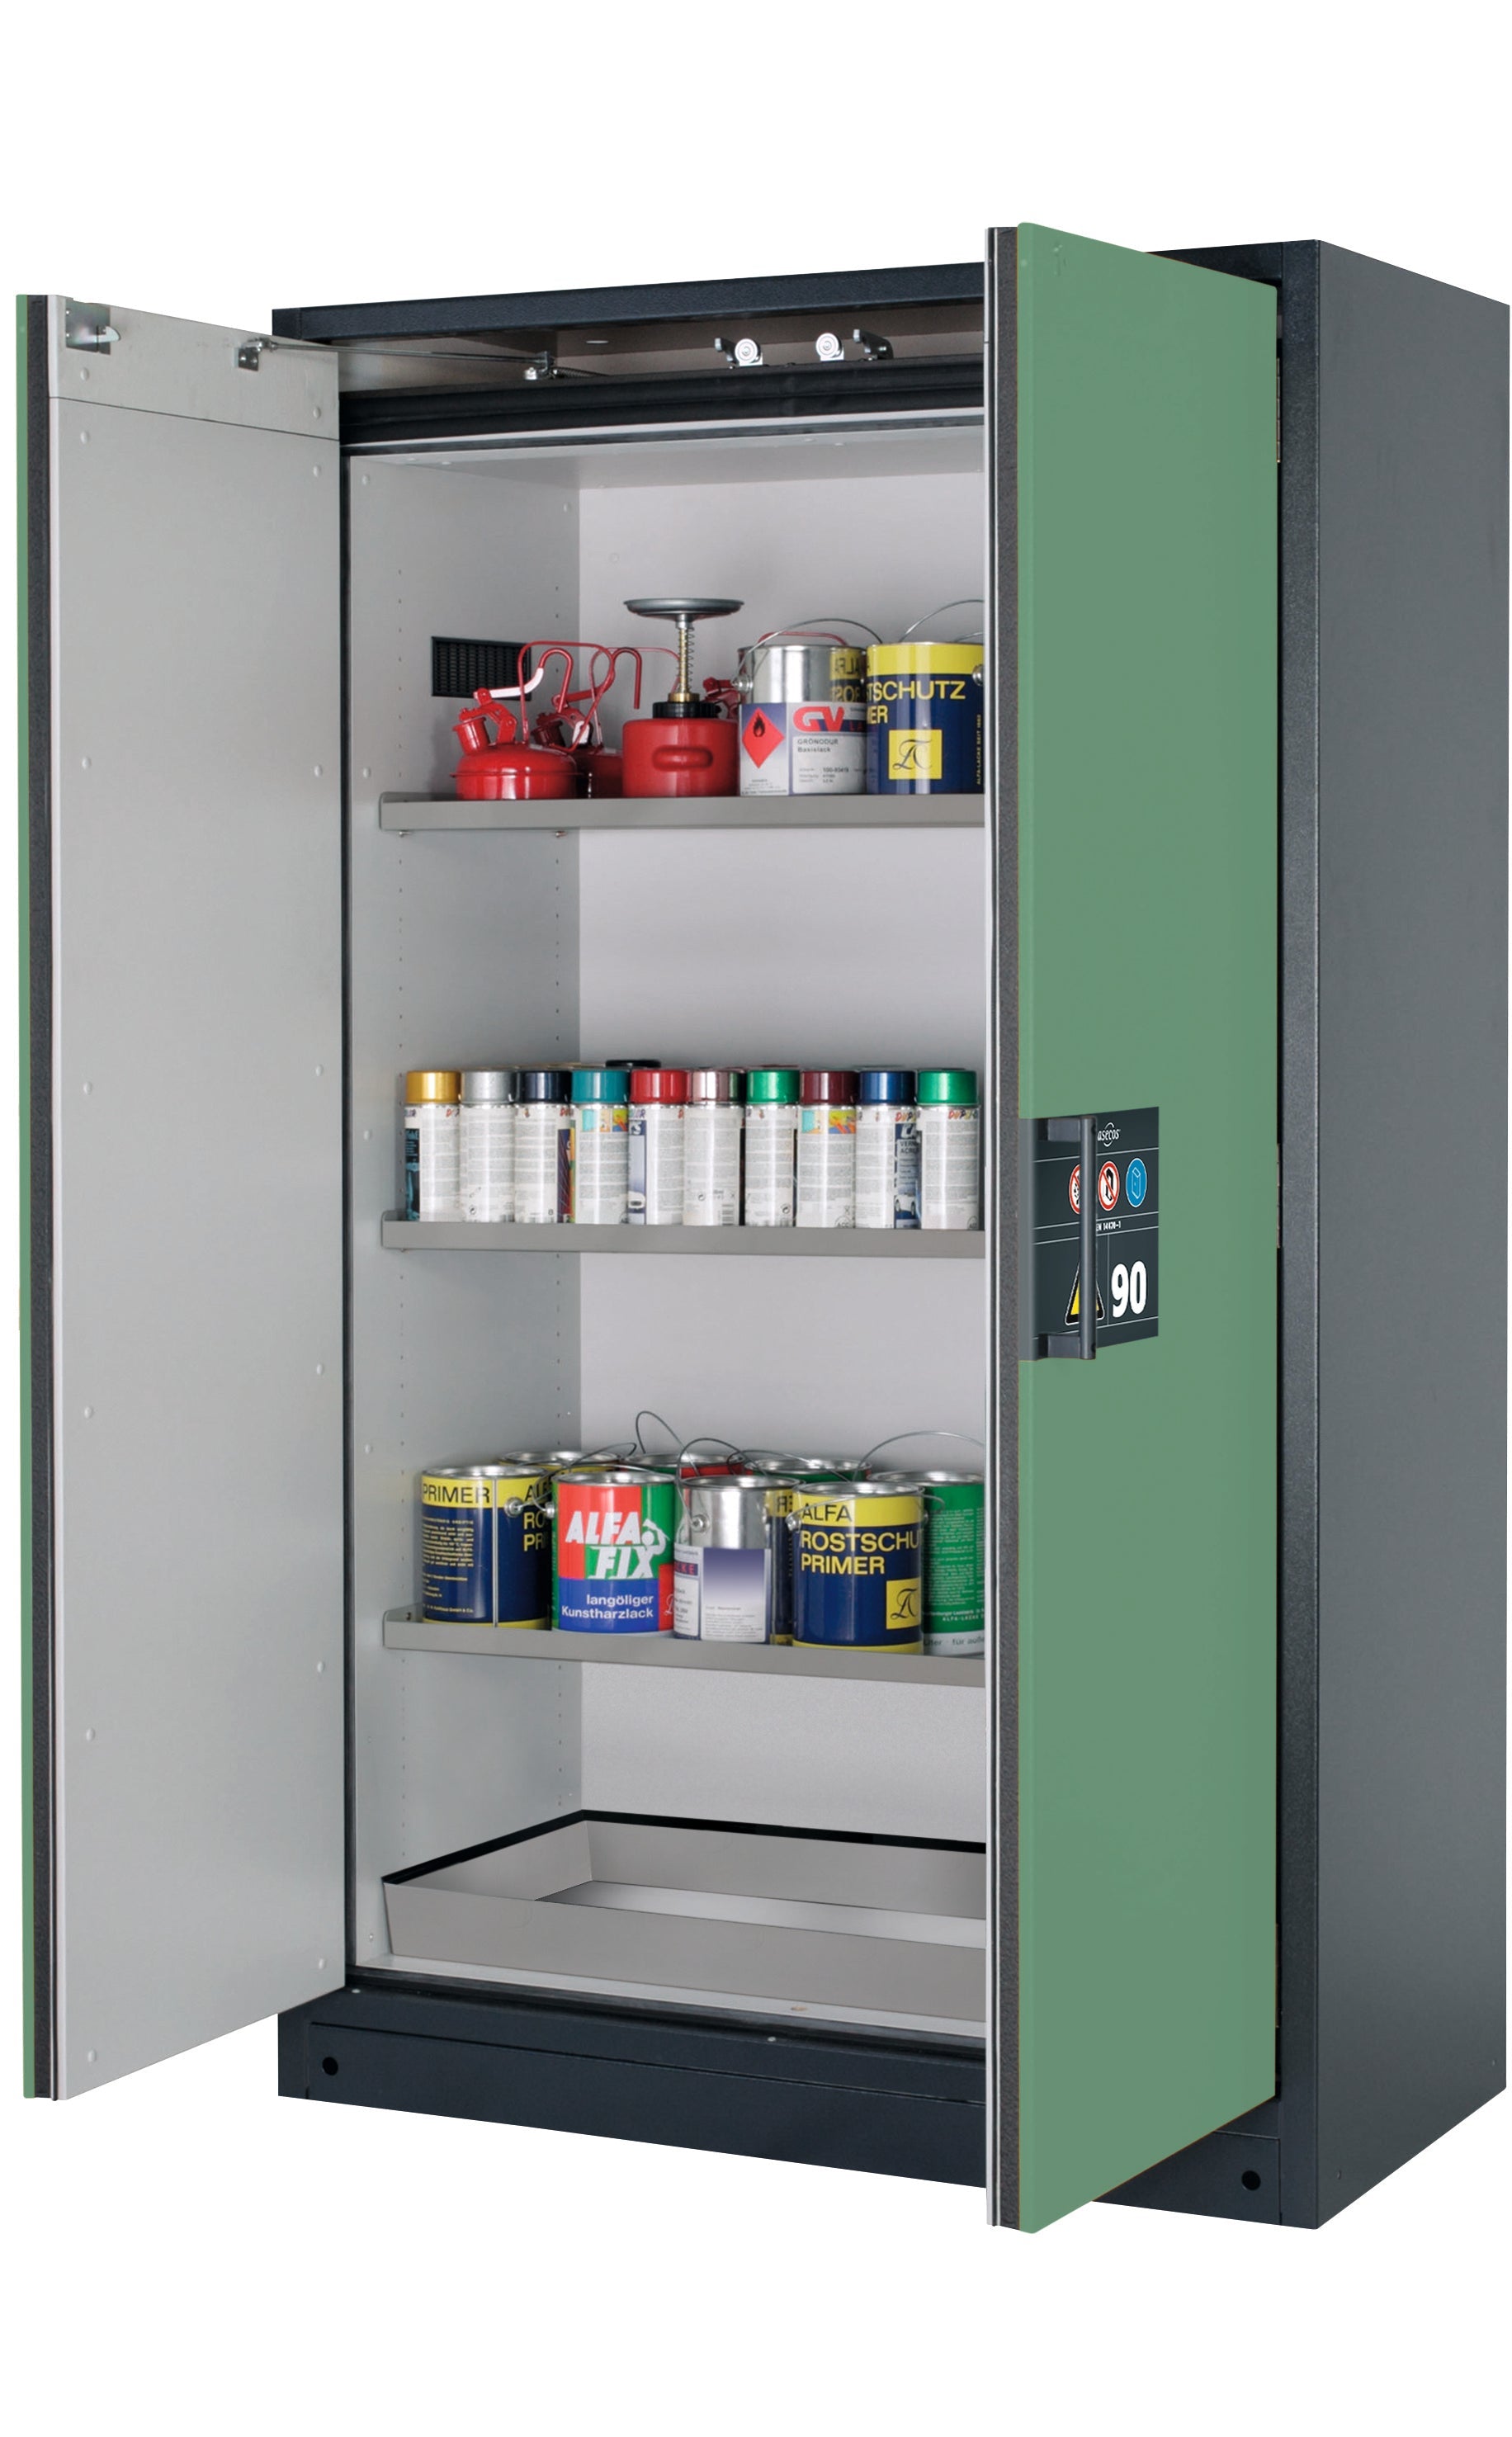 Type 90 safety storage cabinet Q-CLASSIC-90 model Q90.195.120 in reseda green RAL 6011 with 3x shelf standard (stainless steel 1.4301),